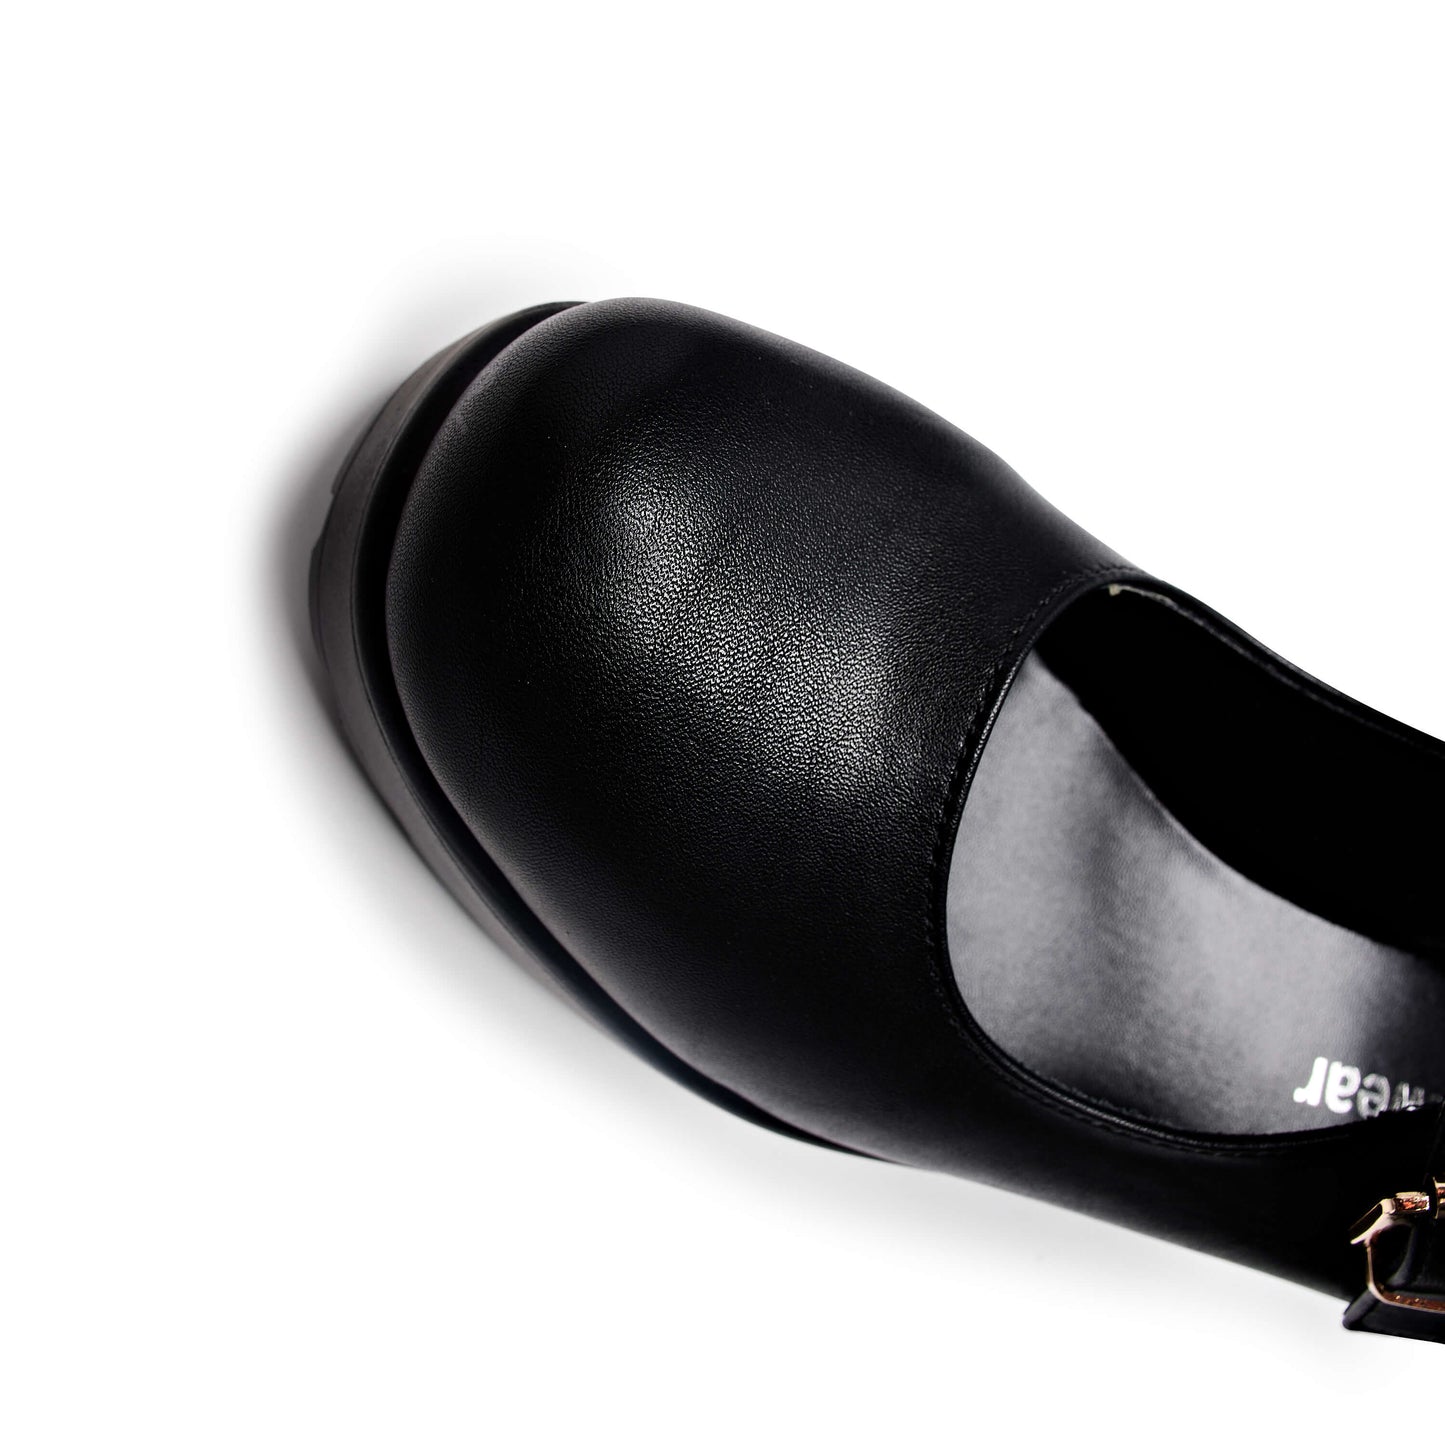 Tira WIDE FIT Mary Jane Shoes 'Faux Leather Edition' - Mary Janes - KOI Footwear - Black - Top View